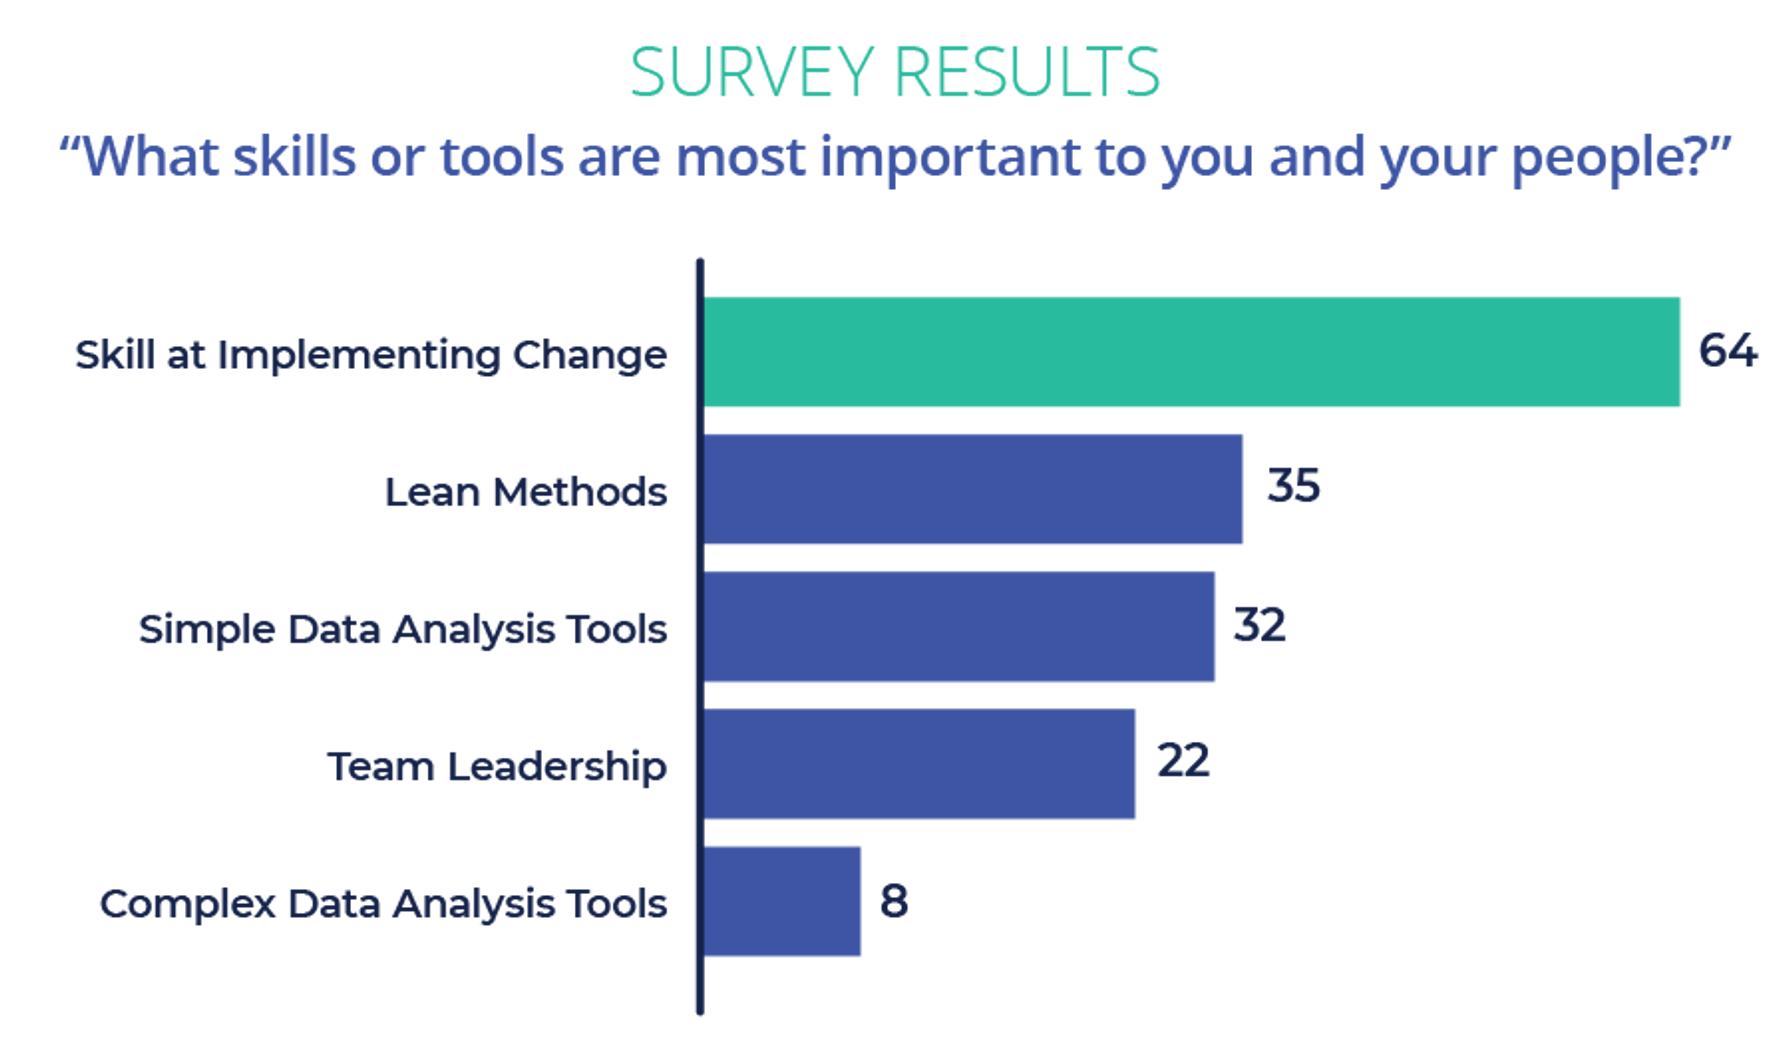 Survey results showing which skills and tools are most important